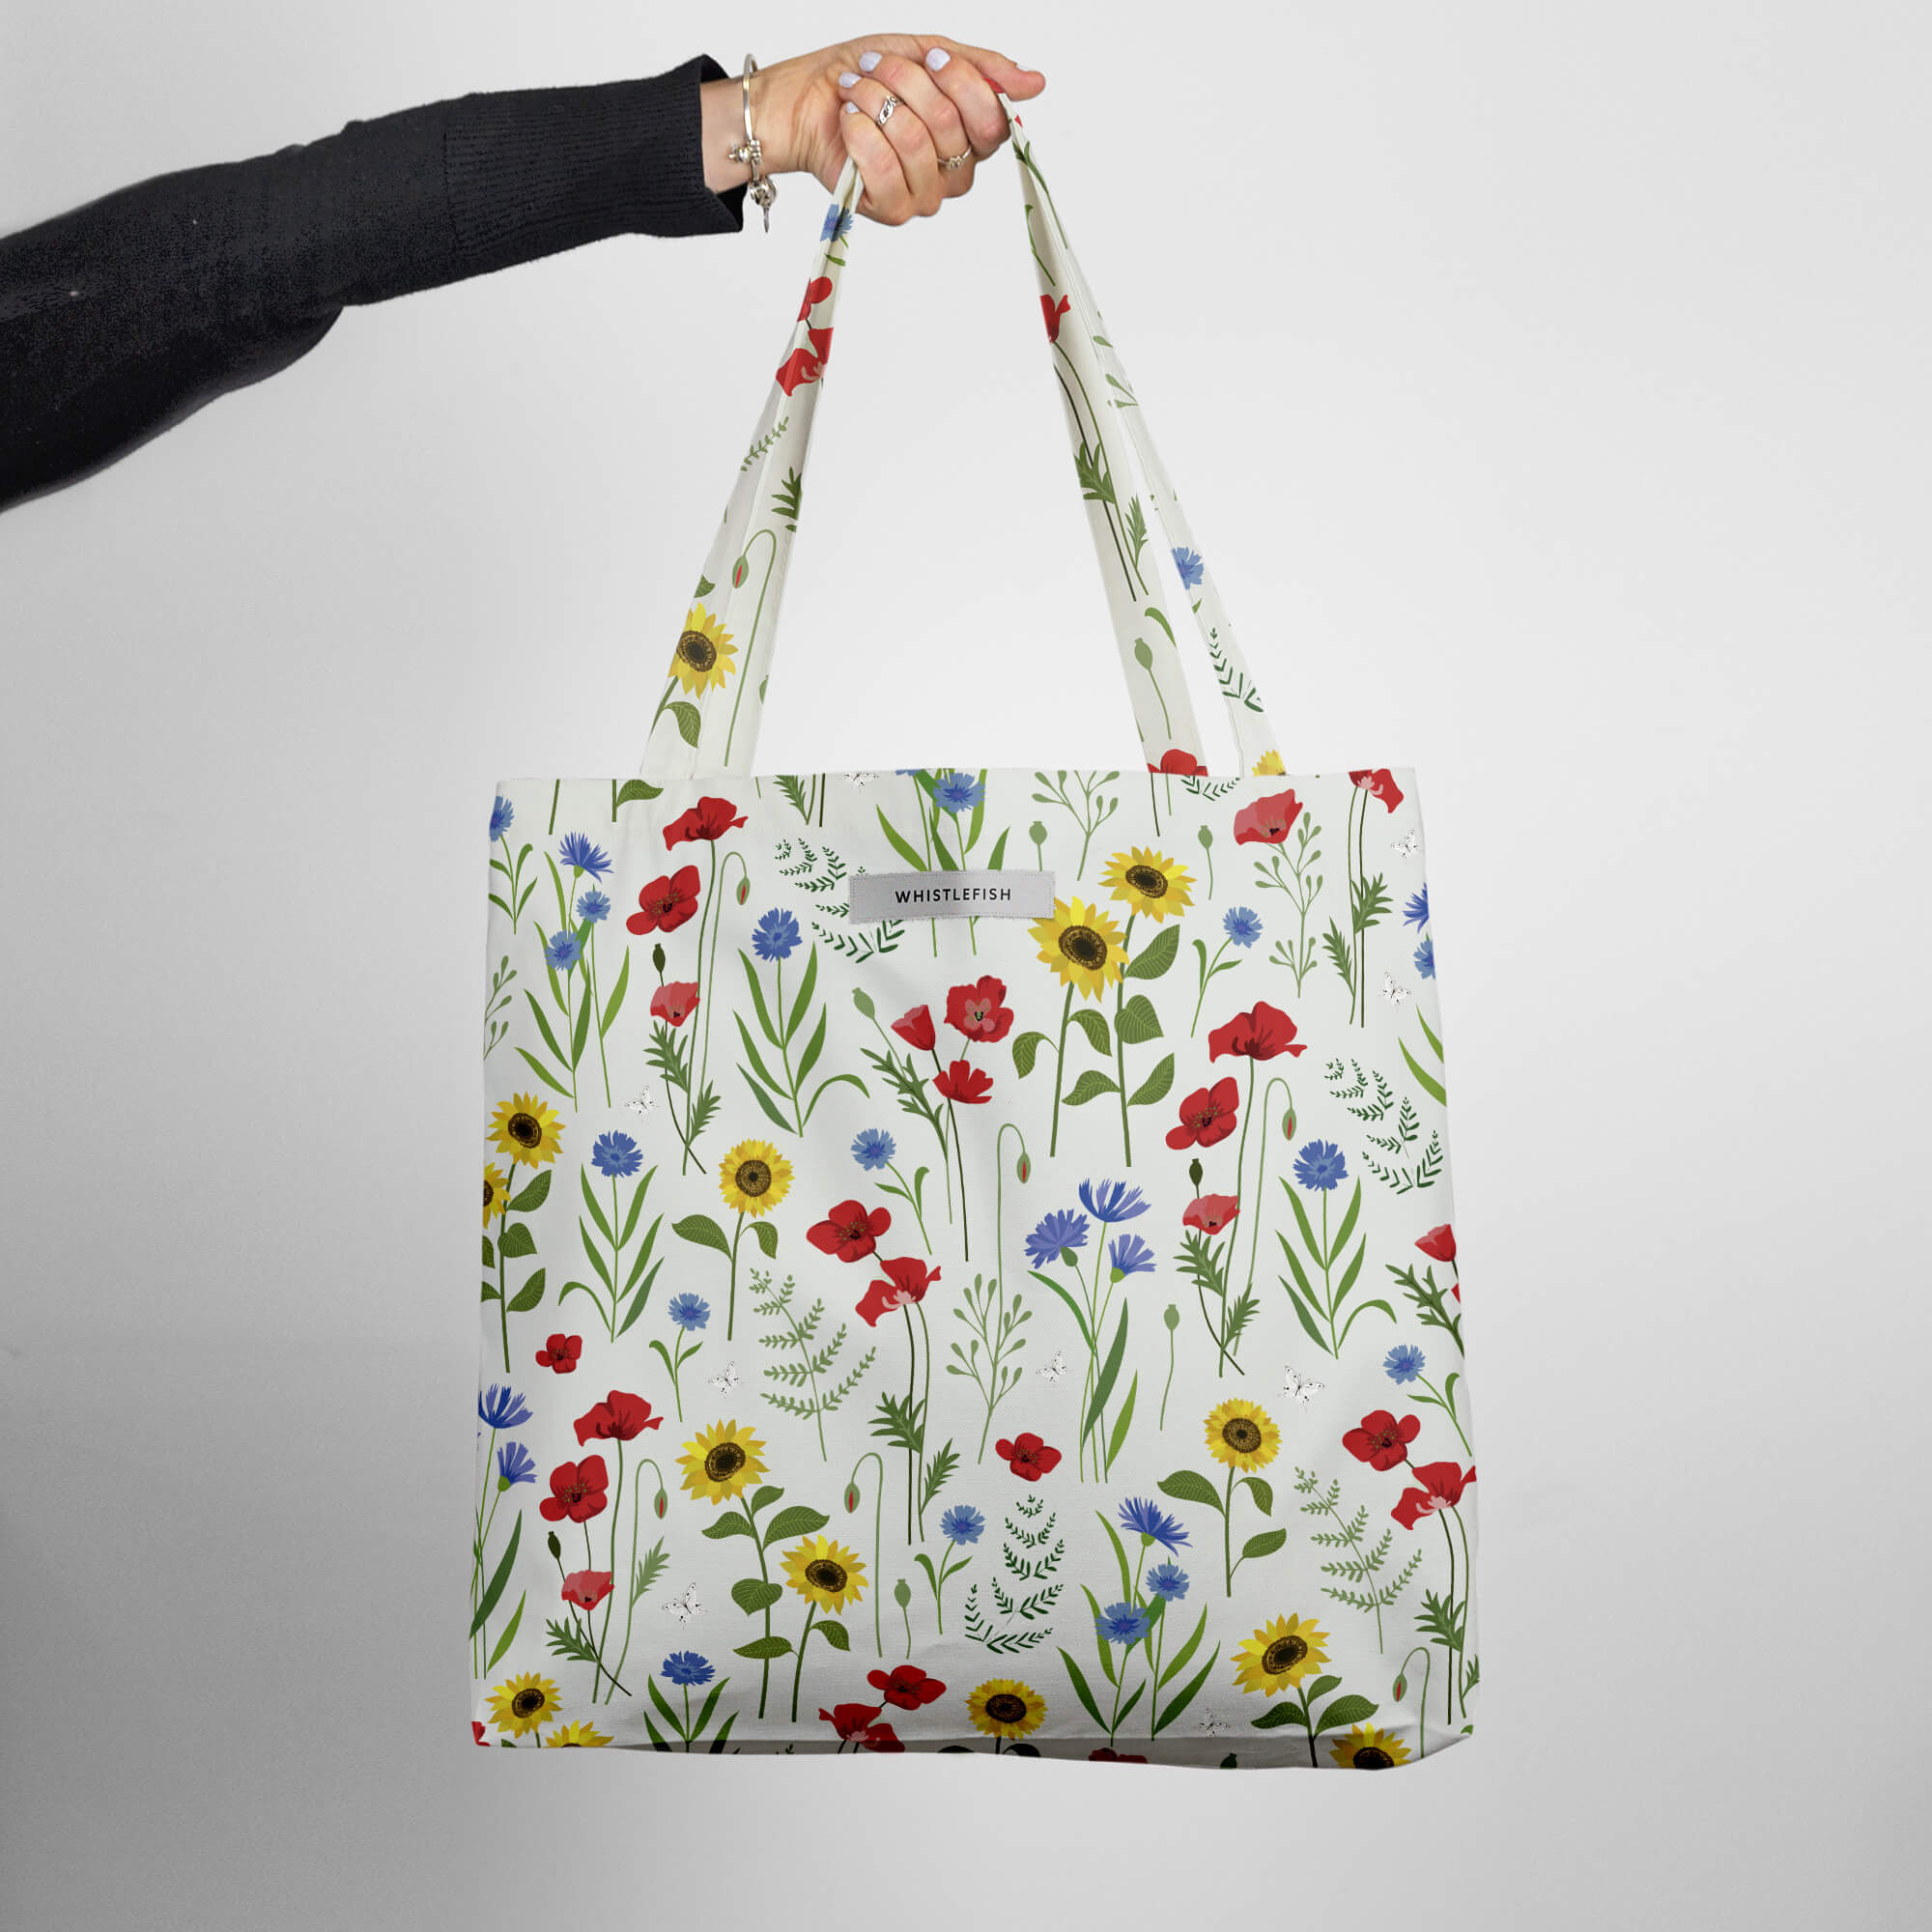 An image of Wild Flowers Tote Bag Whistlefish